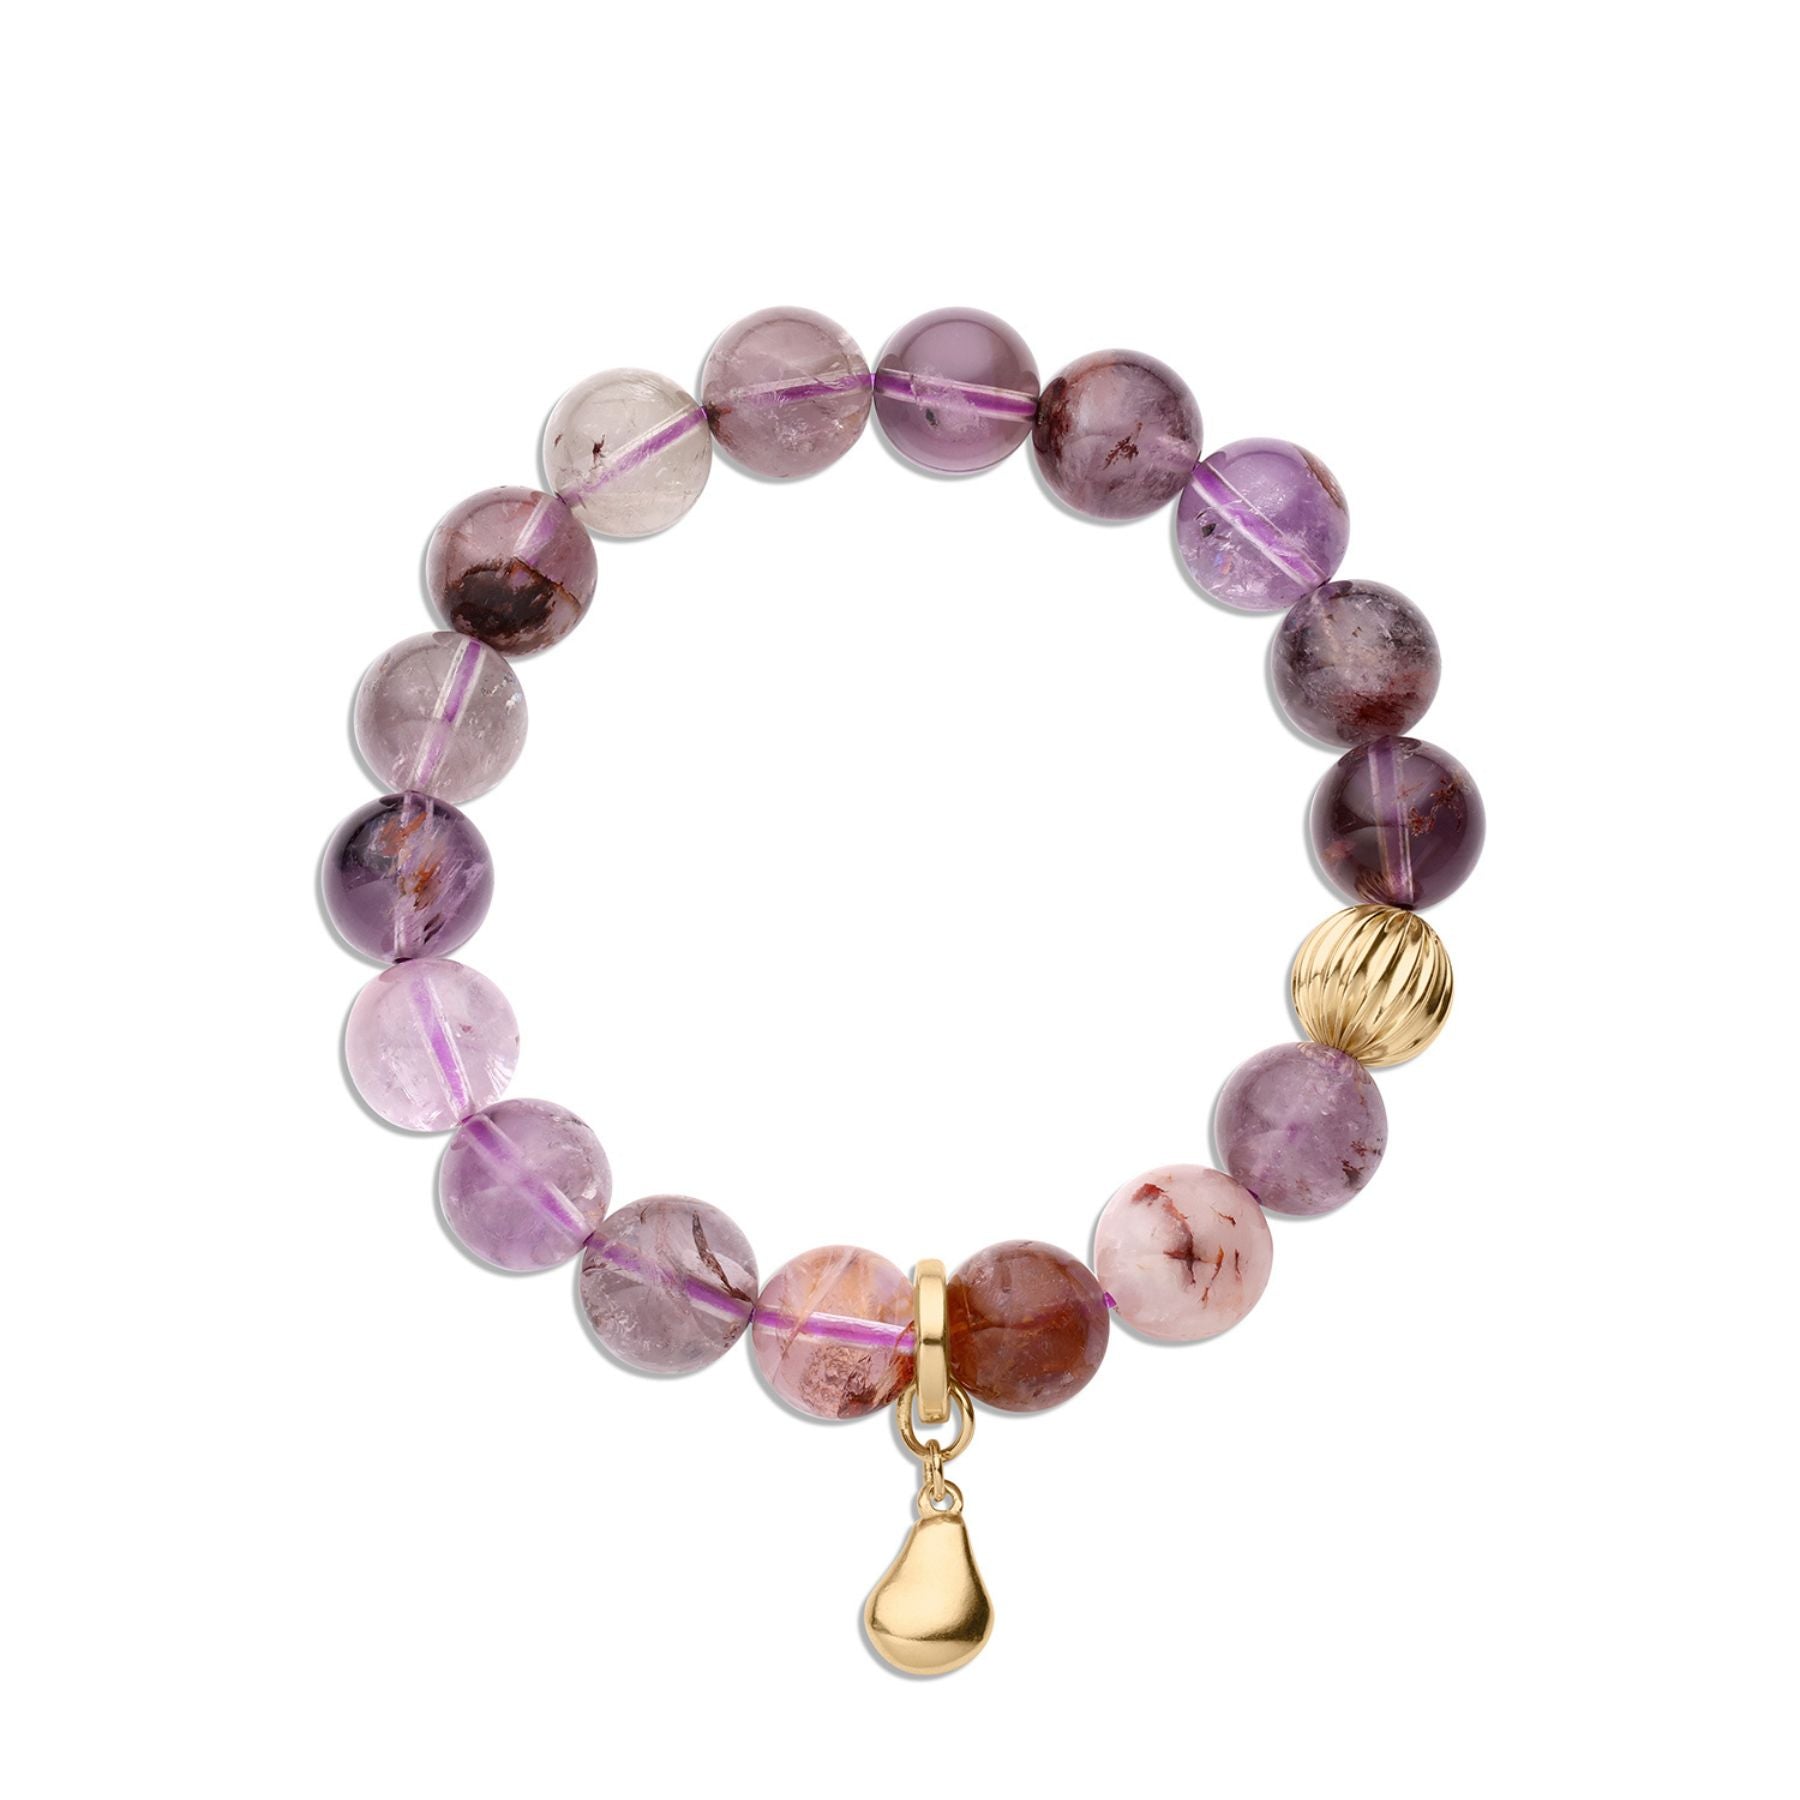 Phantom amethyst beaded bracelet with gold corrugated bead accent and pear charm